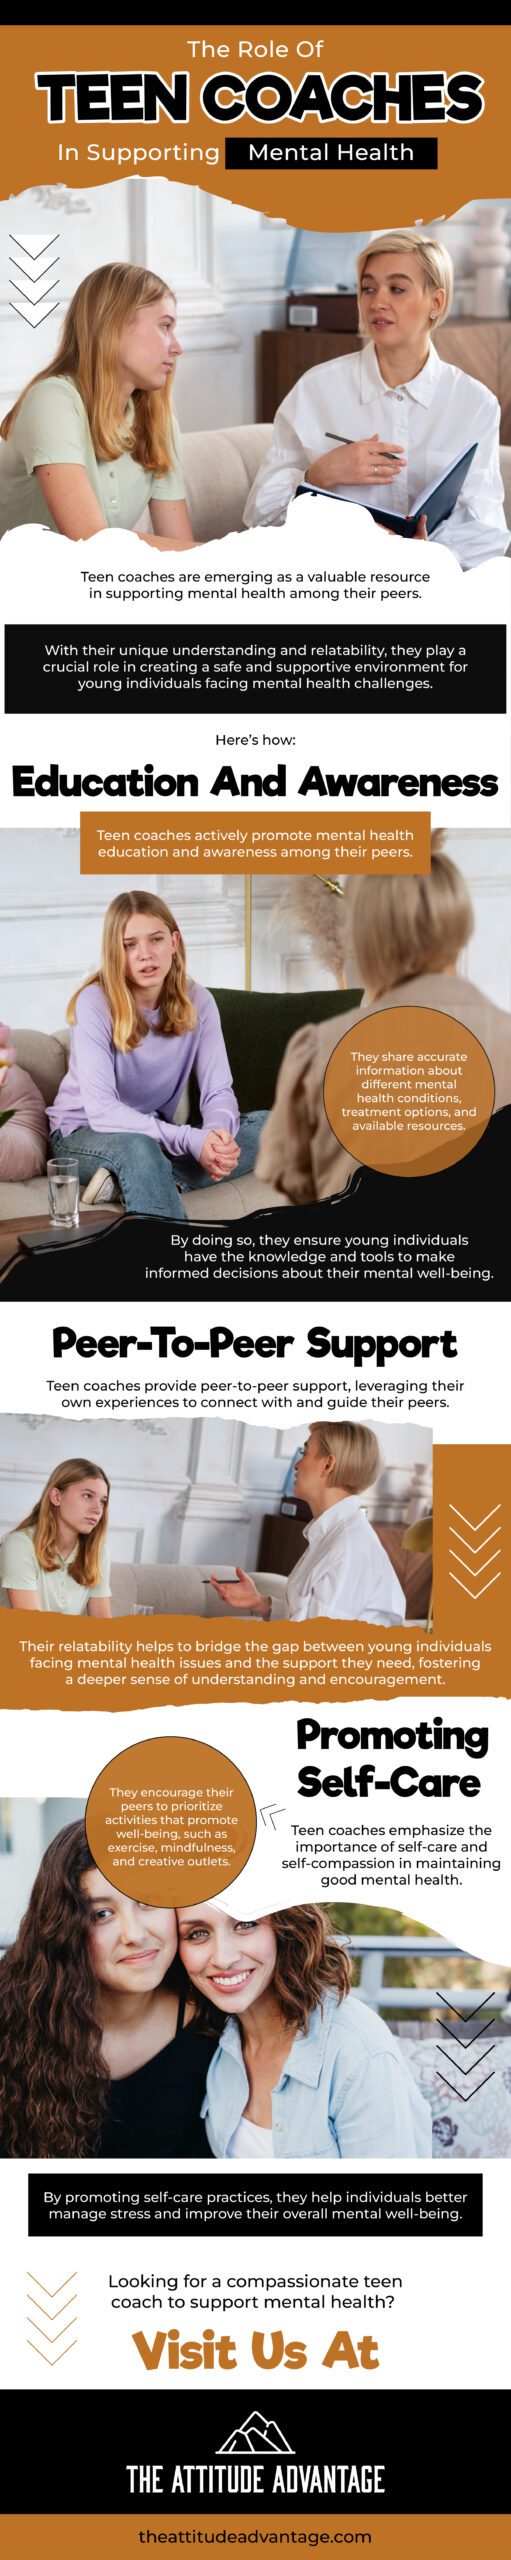 The Role Of Teen Coaches In Supporting Mental - Infographic